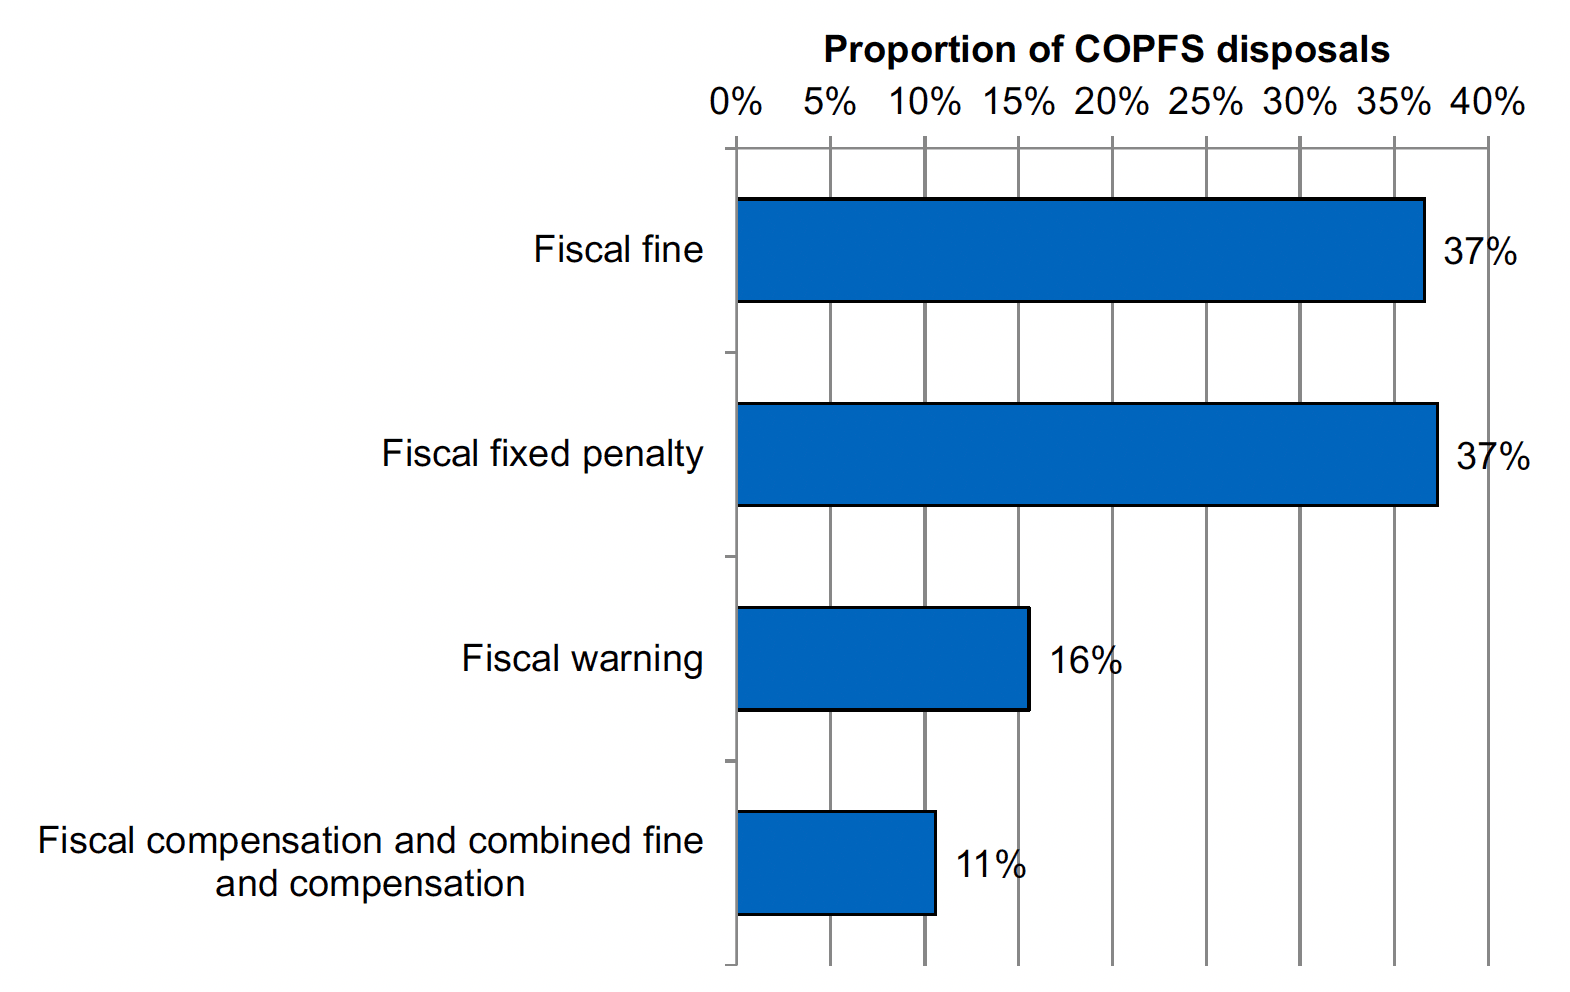 Bar chart showing the proportion of COPFS disposals given by type, with the most being Fiscal Fines (37%) and Fiscal fixed penalties (also 37%).